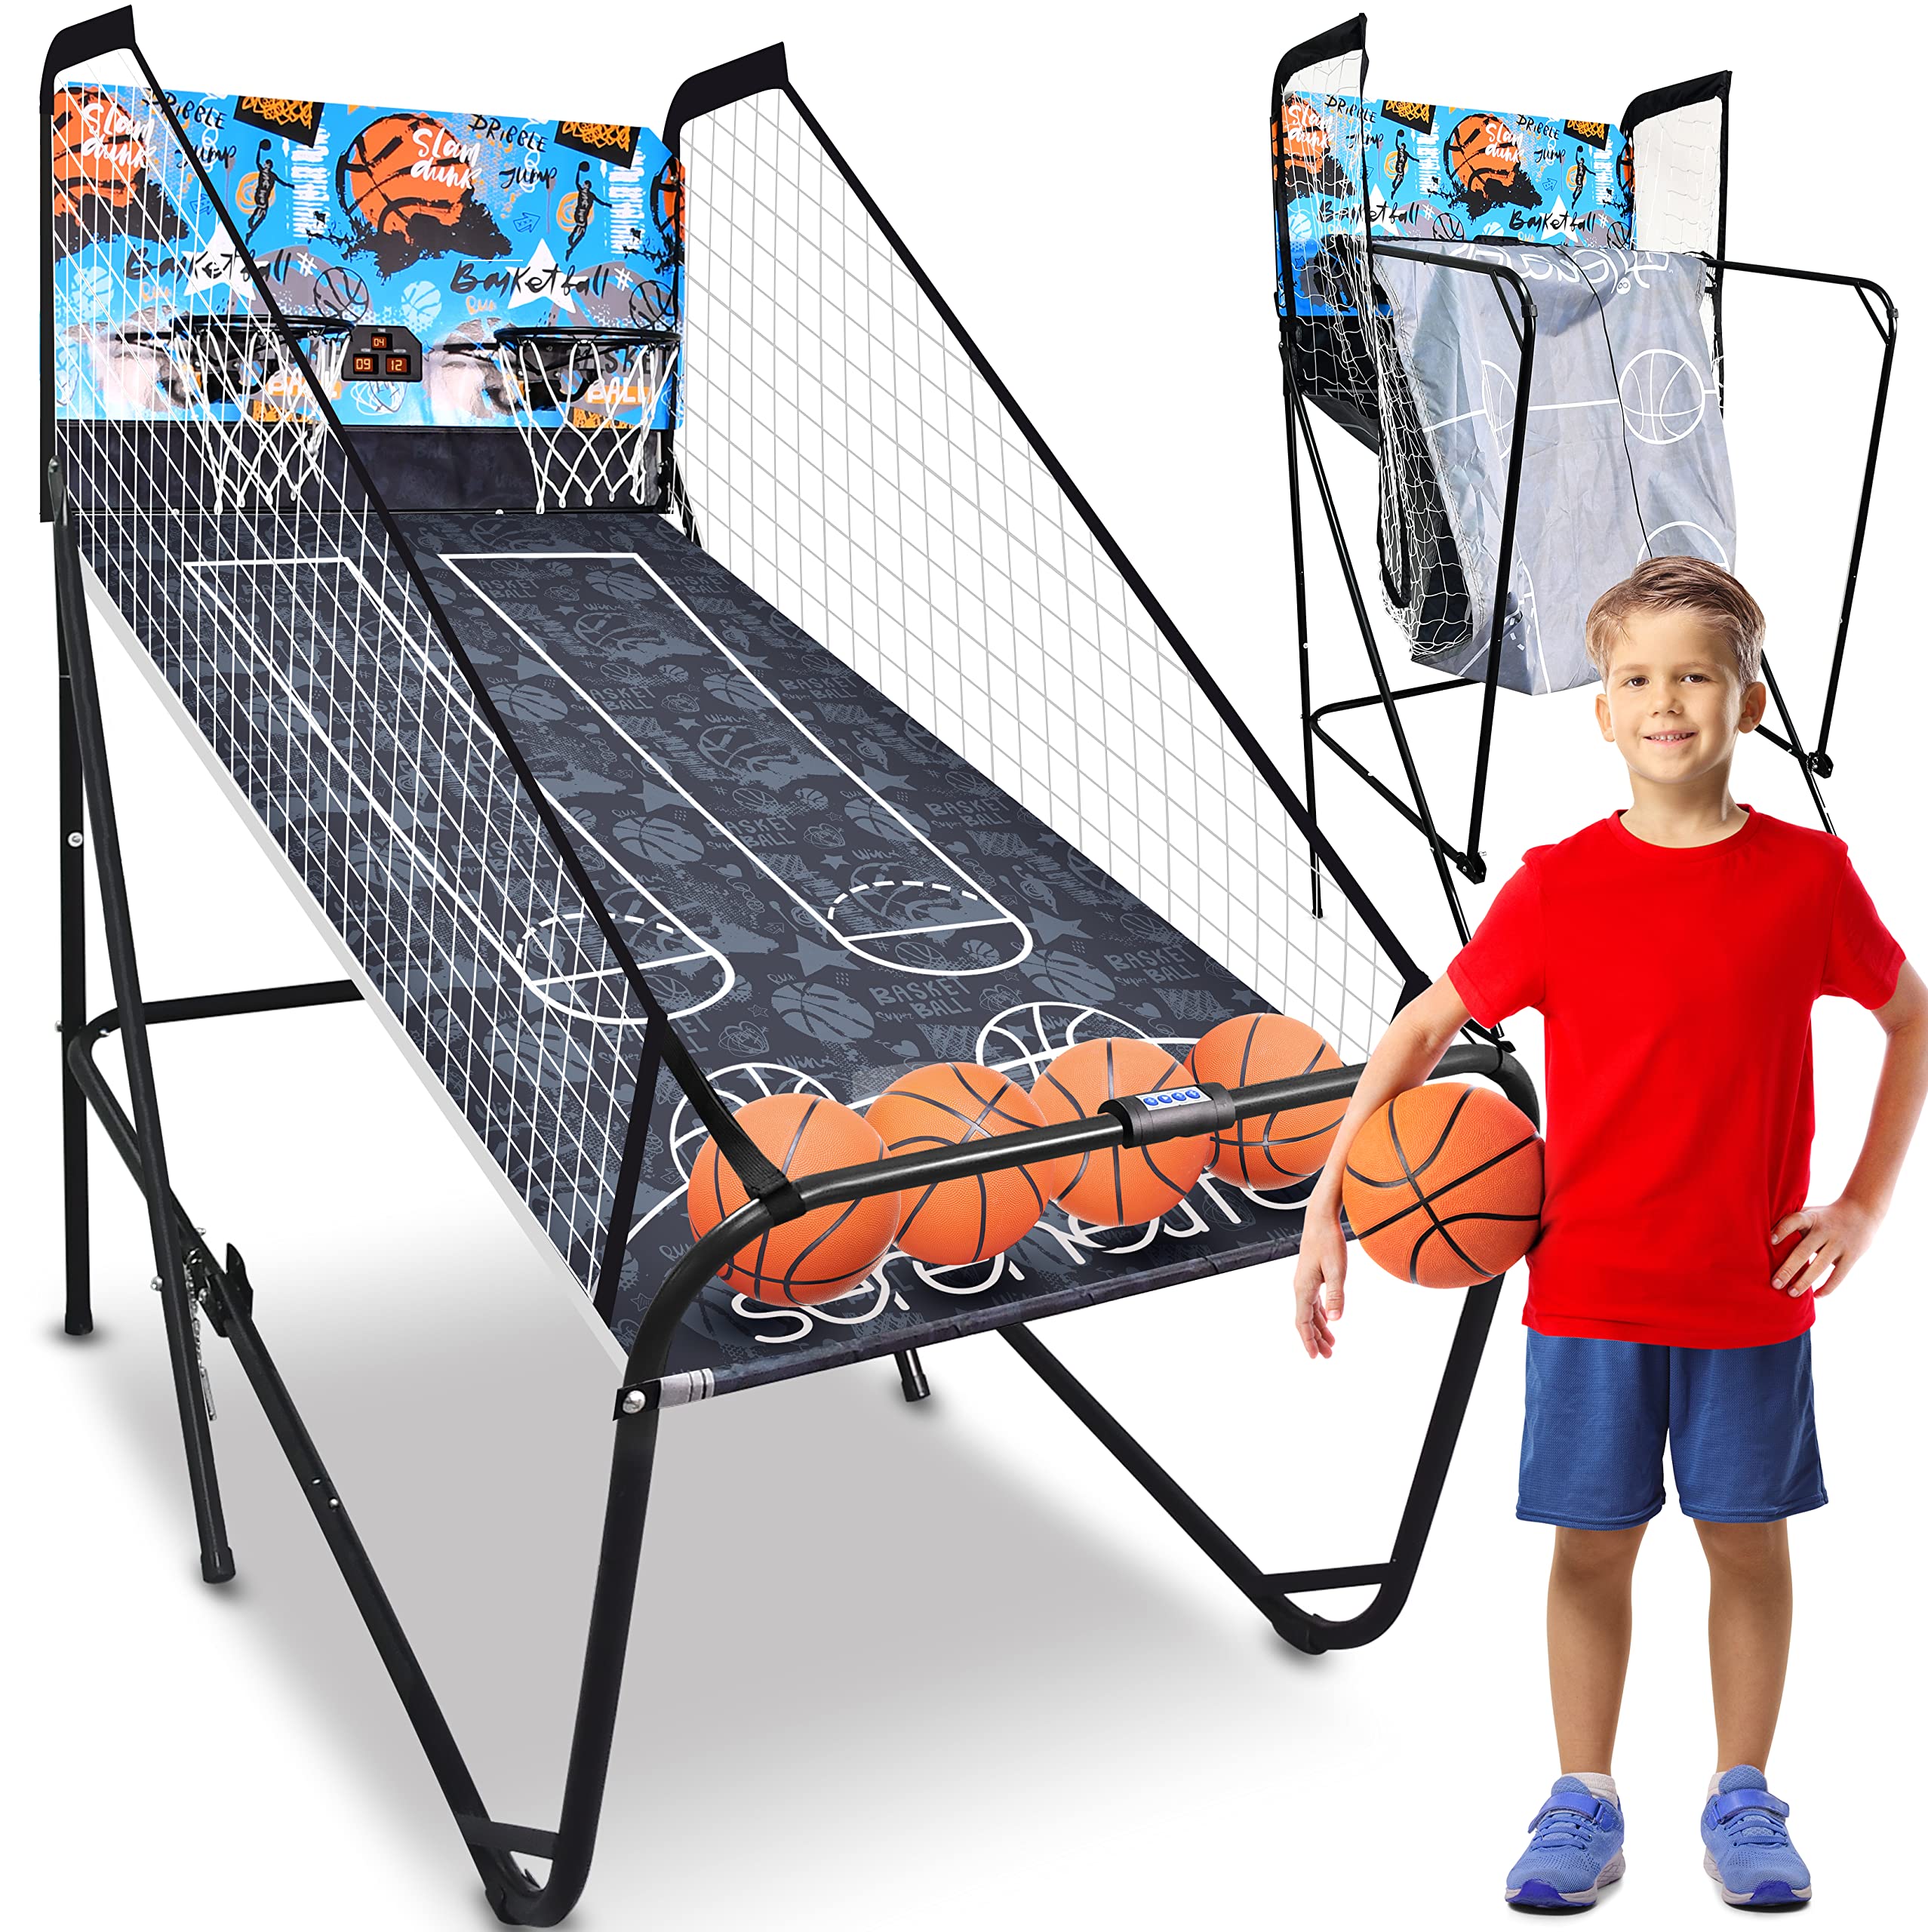 SereneLife Dual Hoop Basketball Shootout Indoor Home Arcade Room game with Electronic LED Digital Double Basket Ball Shot Scoreboar